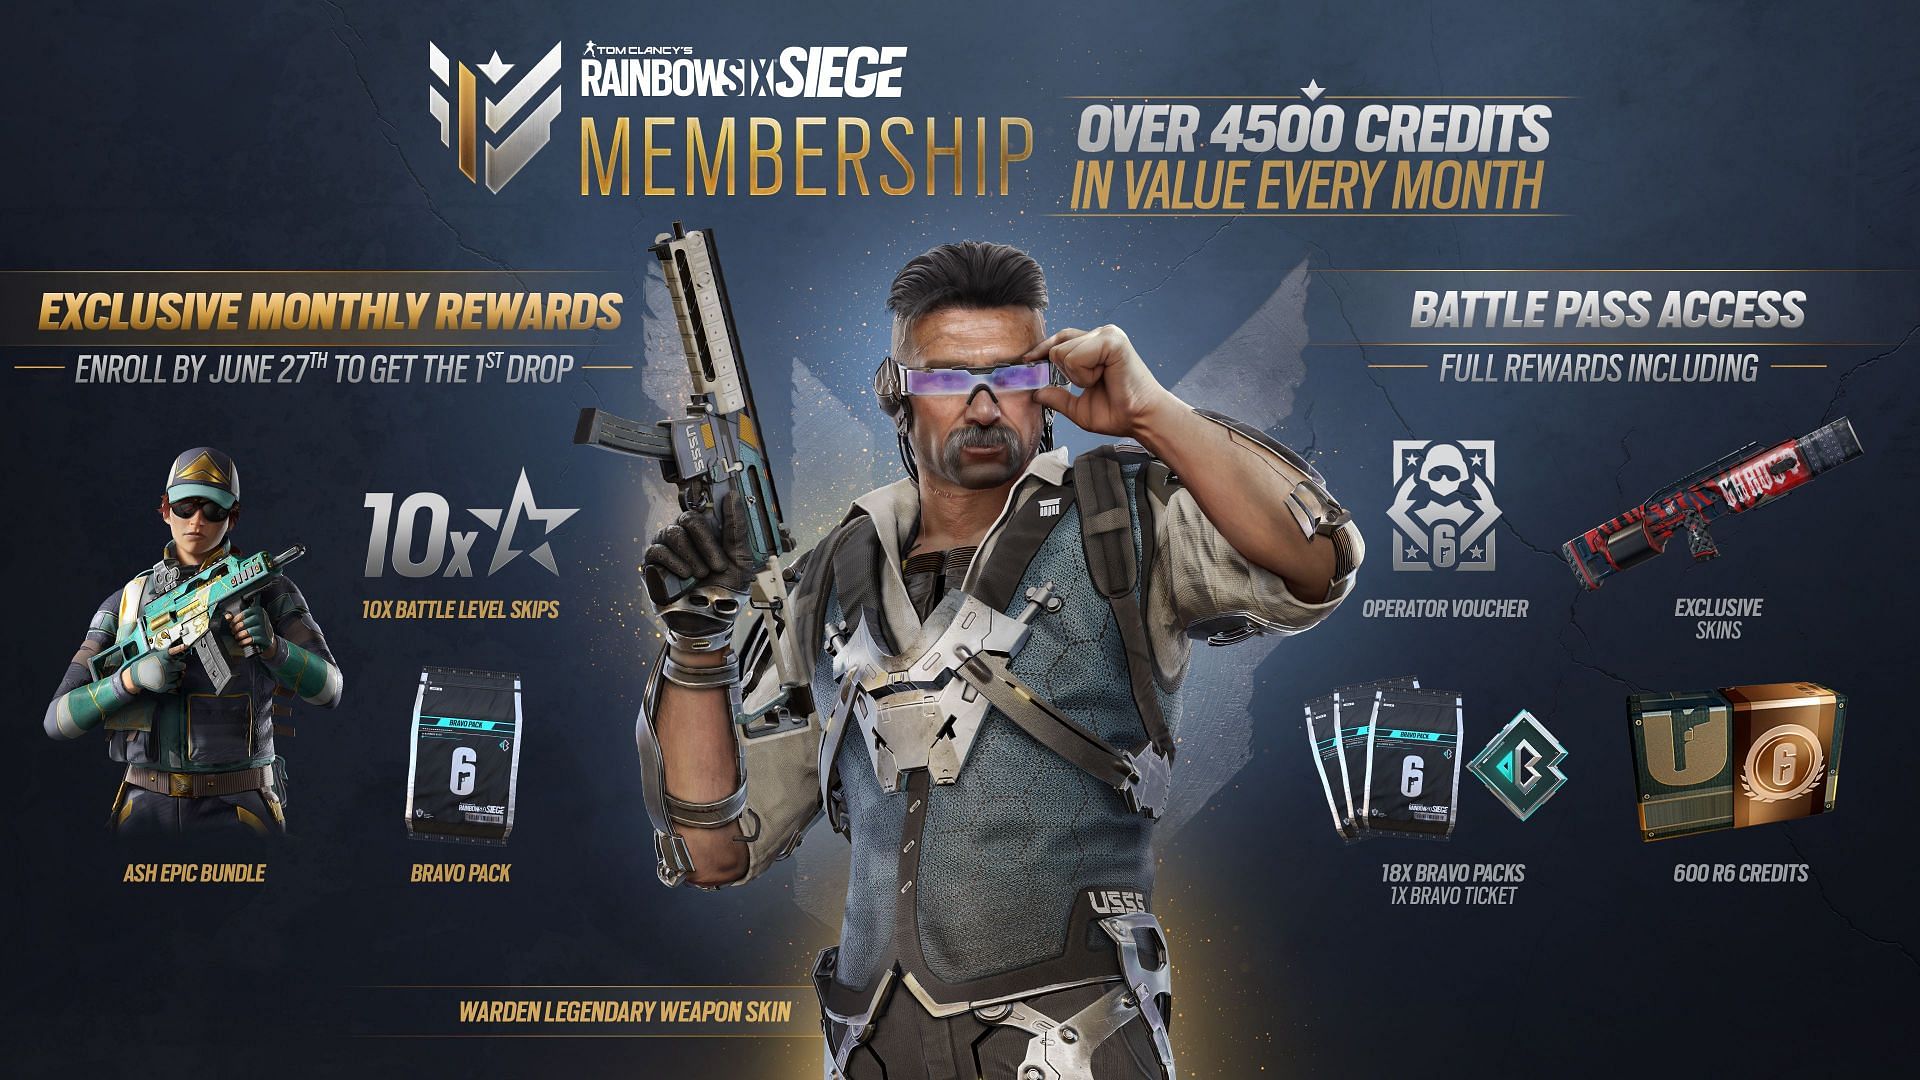 The Rainbow Six Siege Membership program is coming with Y9S2.